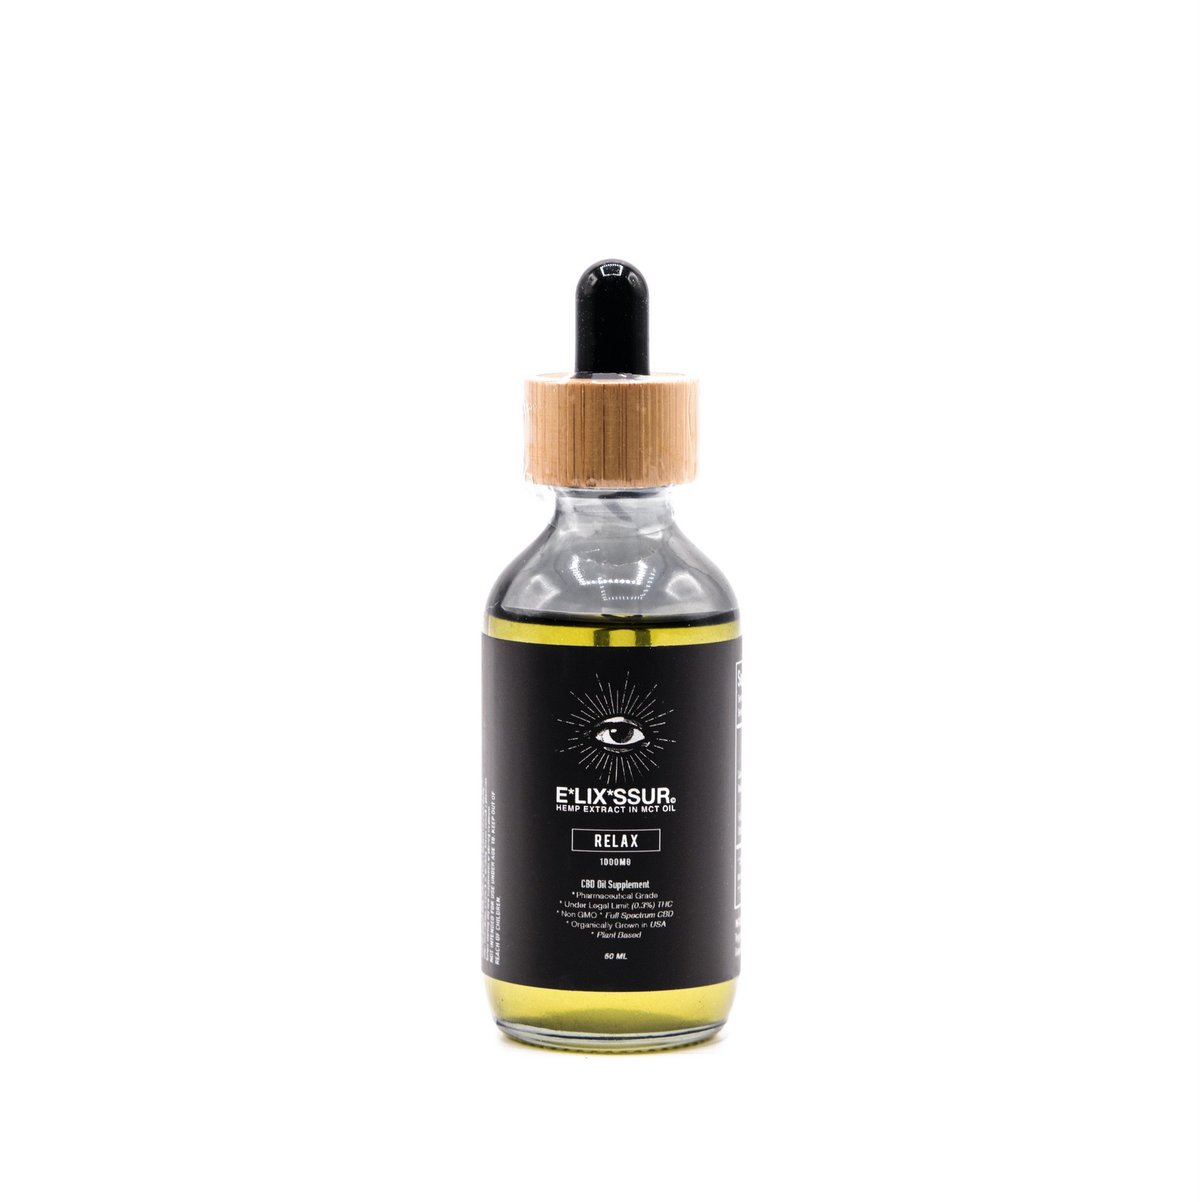 Image of ELIXSSUR [RELAX] PREMIUM HEMP EXTRACT IN MCT OIL